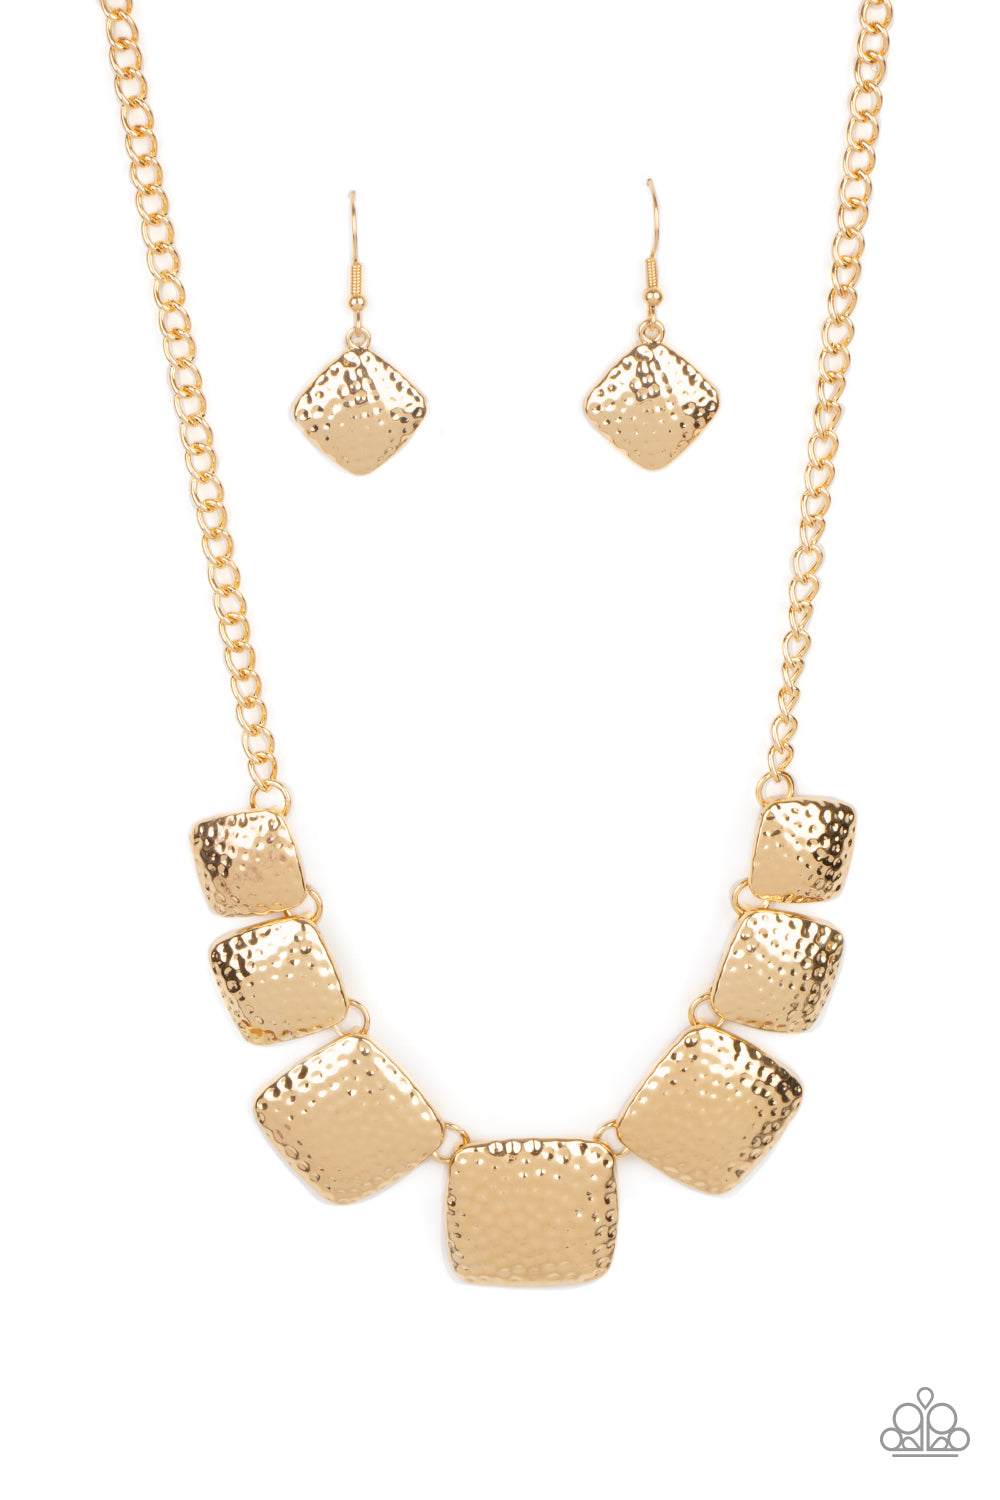 Keeping It RELIC - Gold Necklace Set - Princess Glam Shop